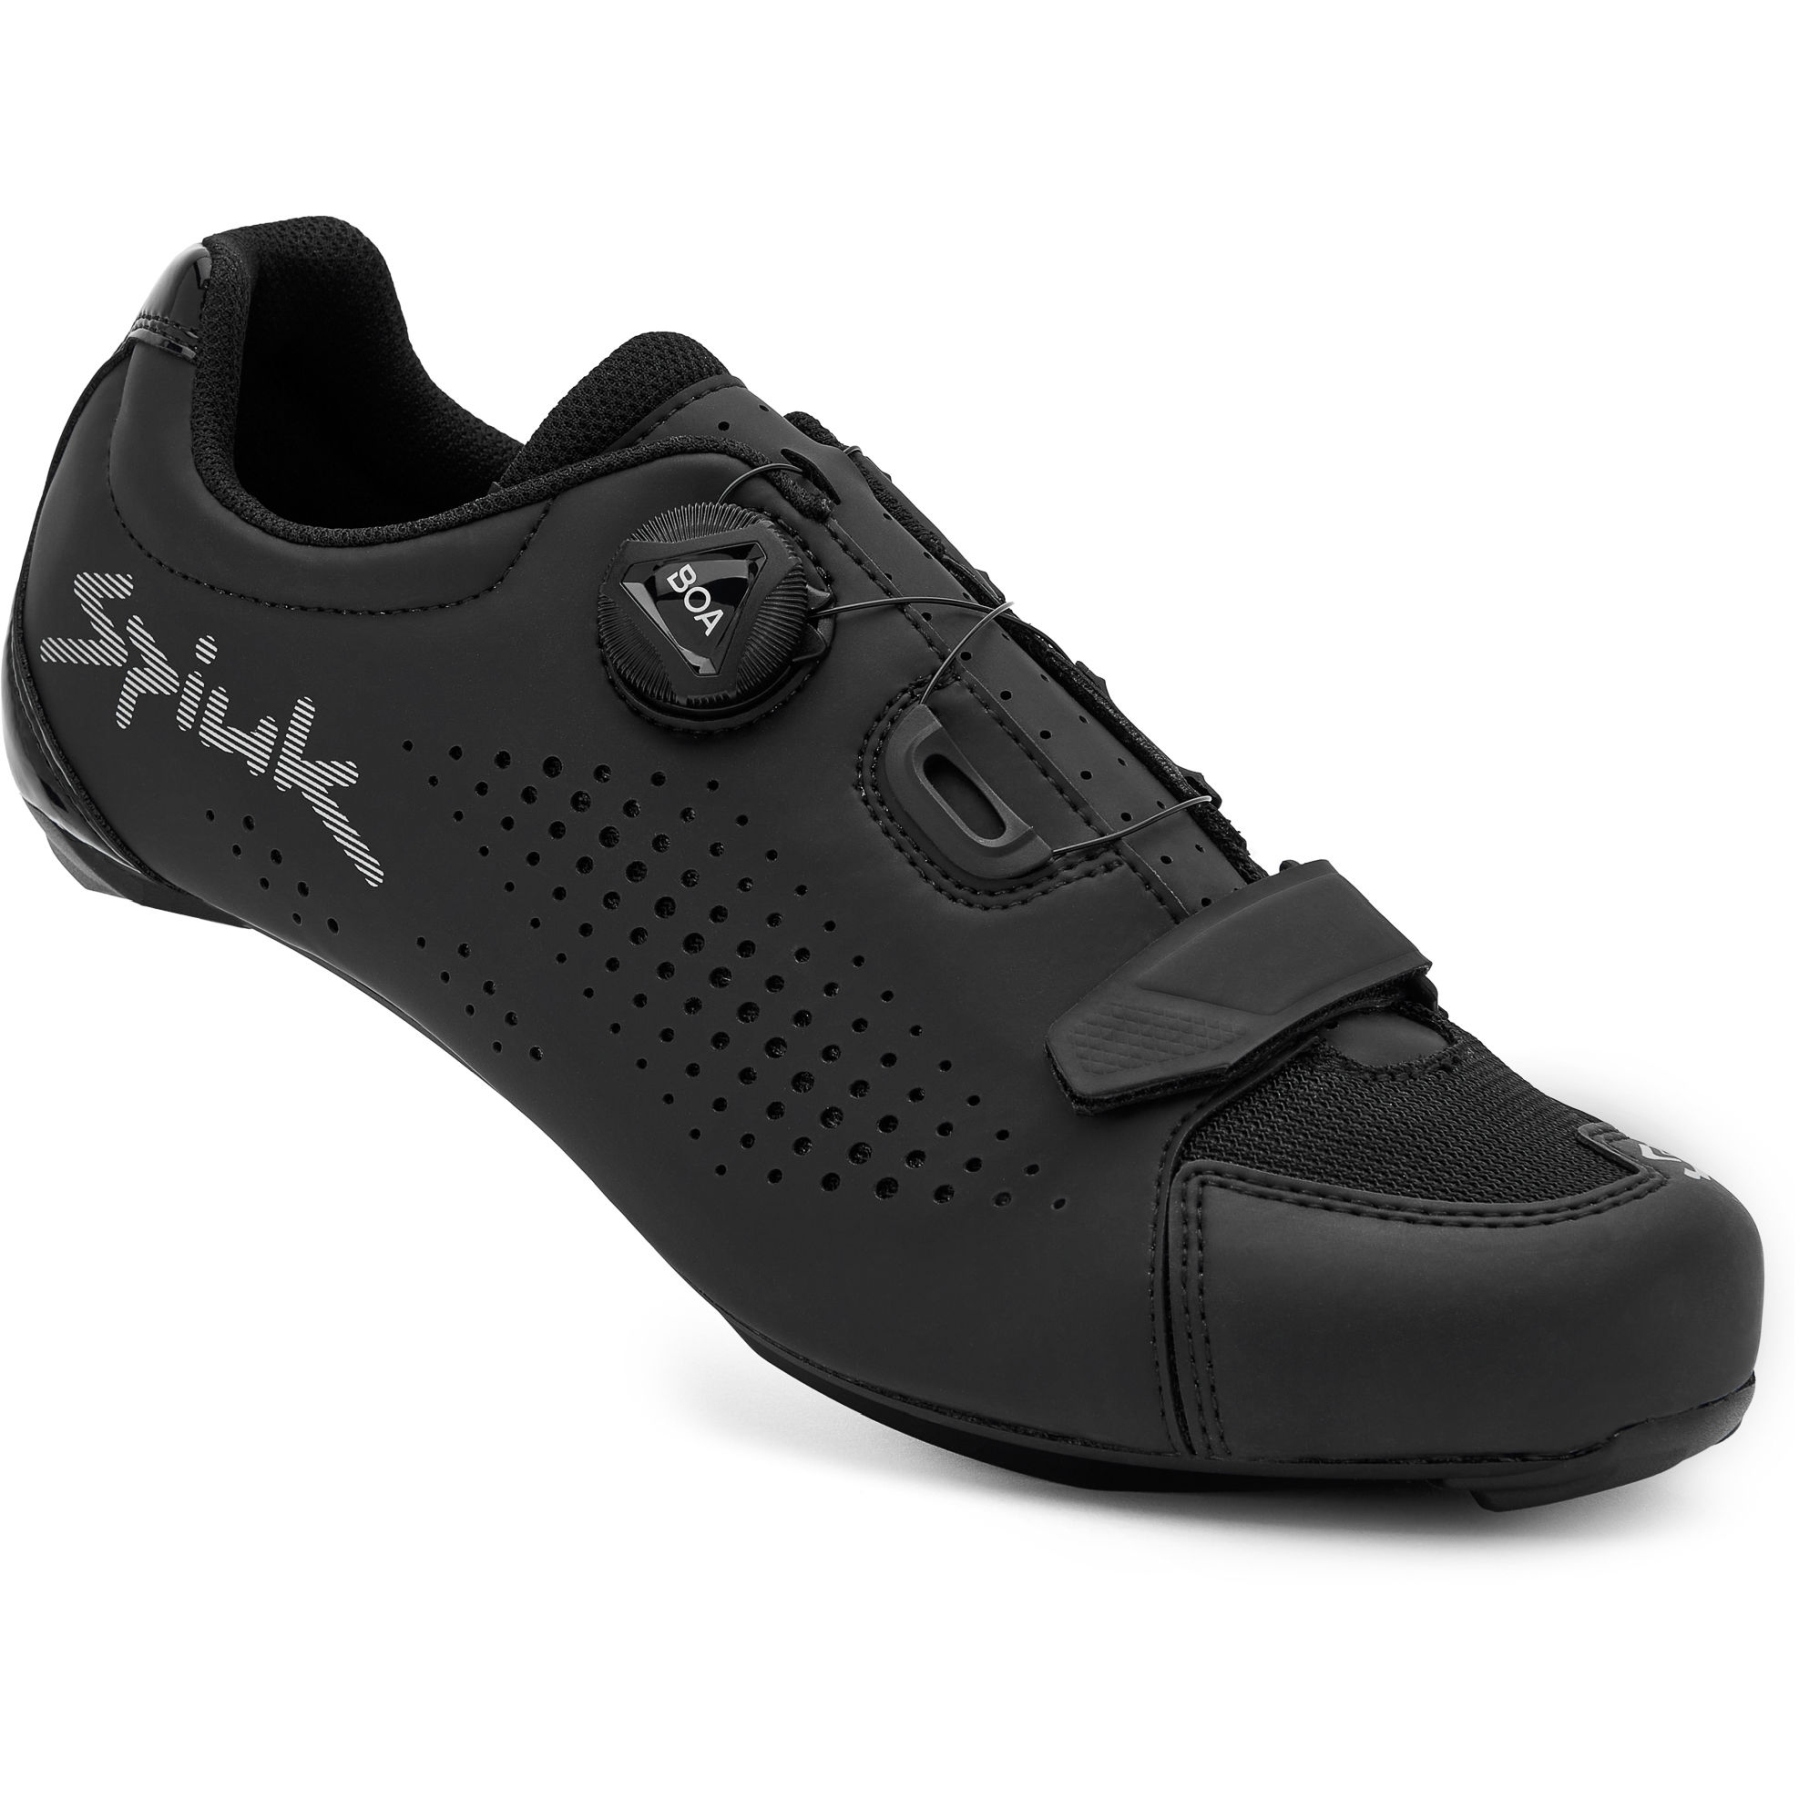 Picture of Spiuk Caray Road Shoe - black